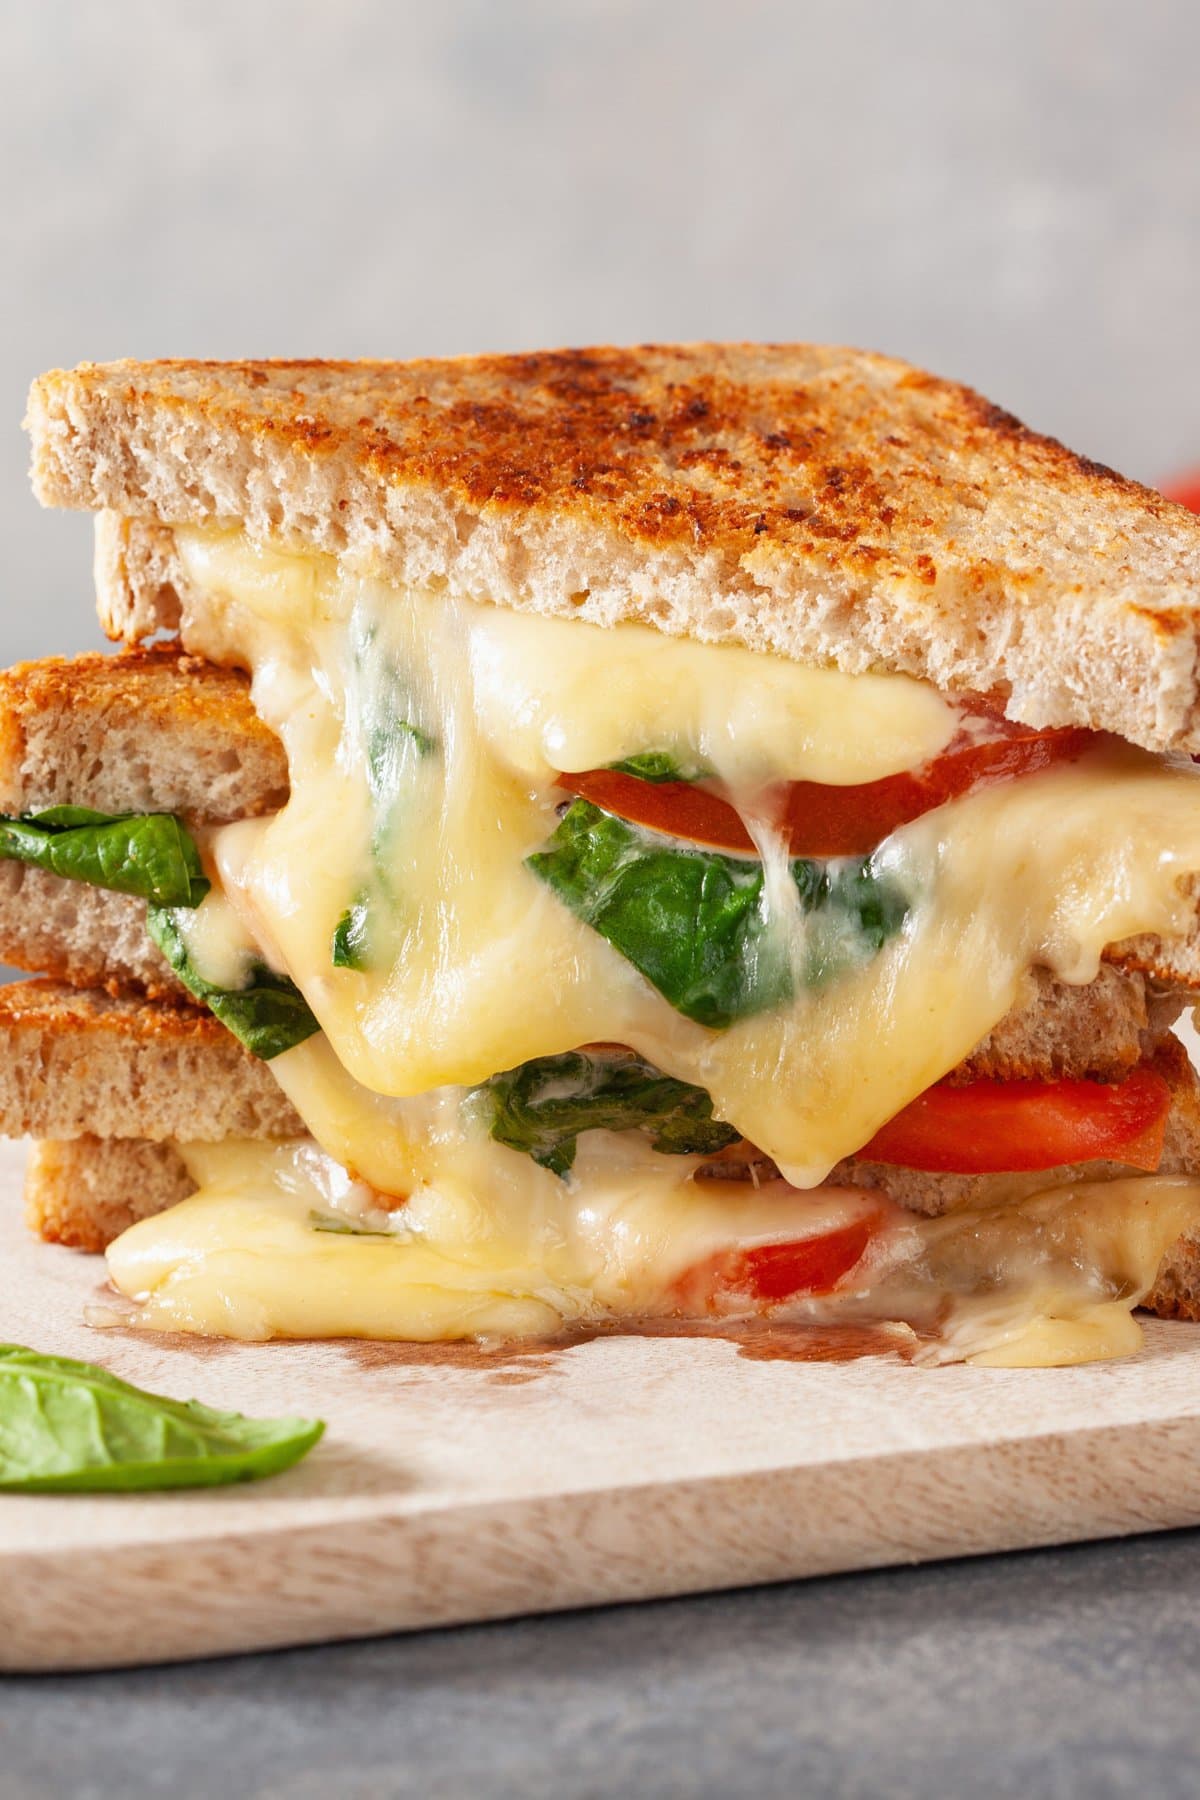 Layer of Sliced in Half Grilled Cheese Sandwich Made with Tomatoes, Lettuce and Melted Cheese